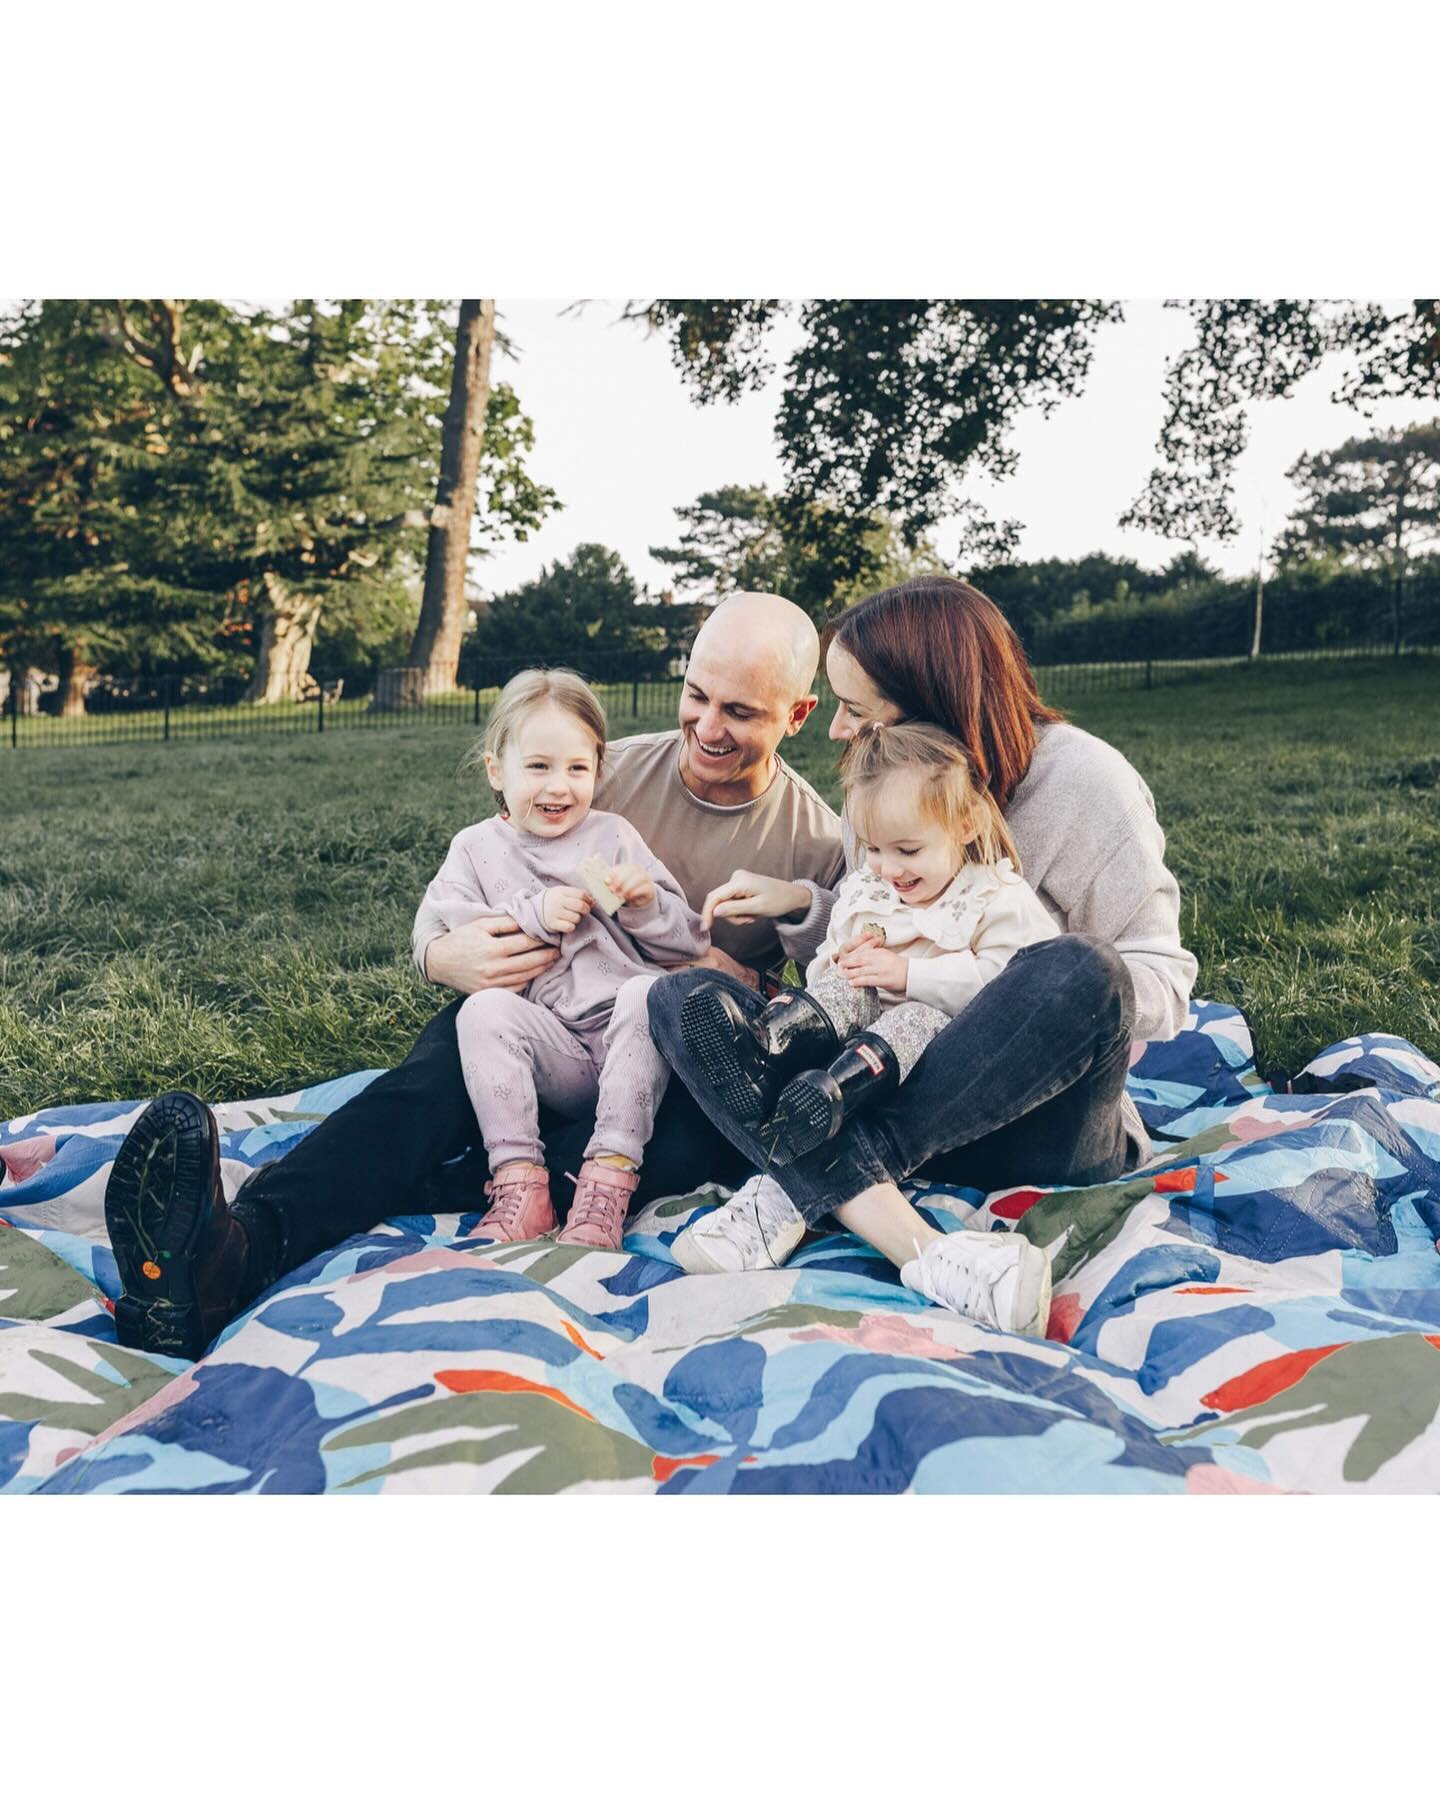 New blog post! Link in bio.

#photography  #photographer #naturalphotography  #naturalphotos  #familyphotography #family #familyphotographer  #familyphotoshoot #documentaryphotography #bristolfamilyphotographer #bristolphotographer  #naturalportrait 